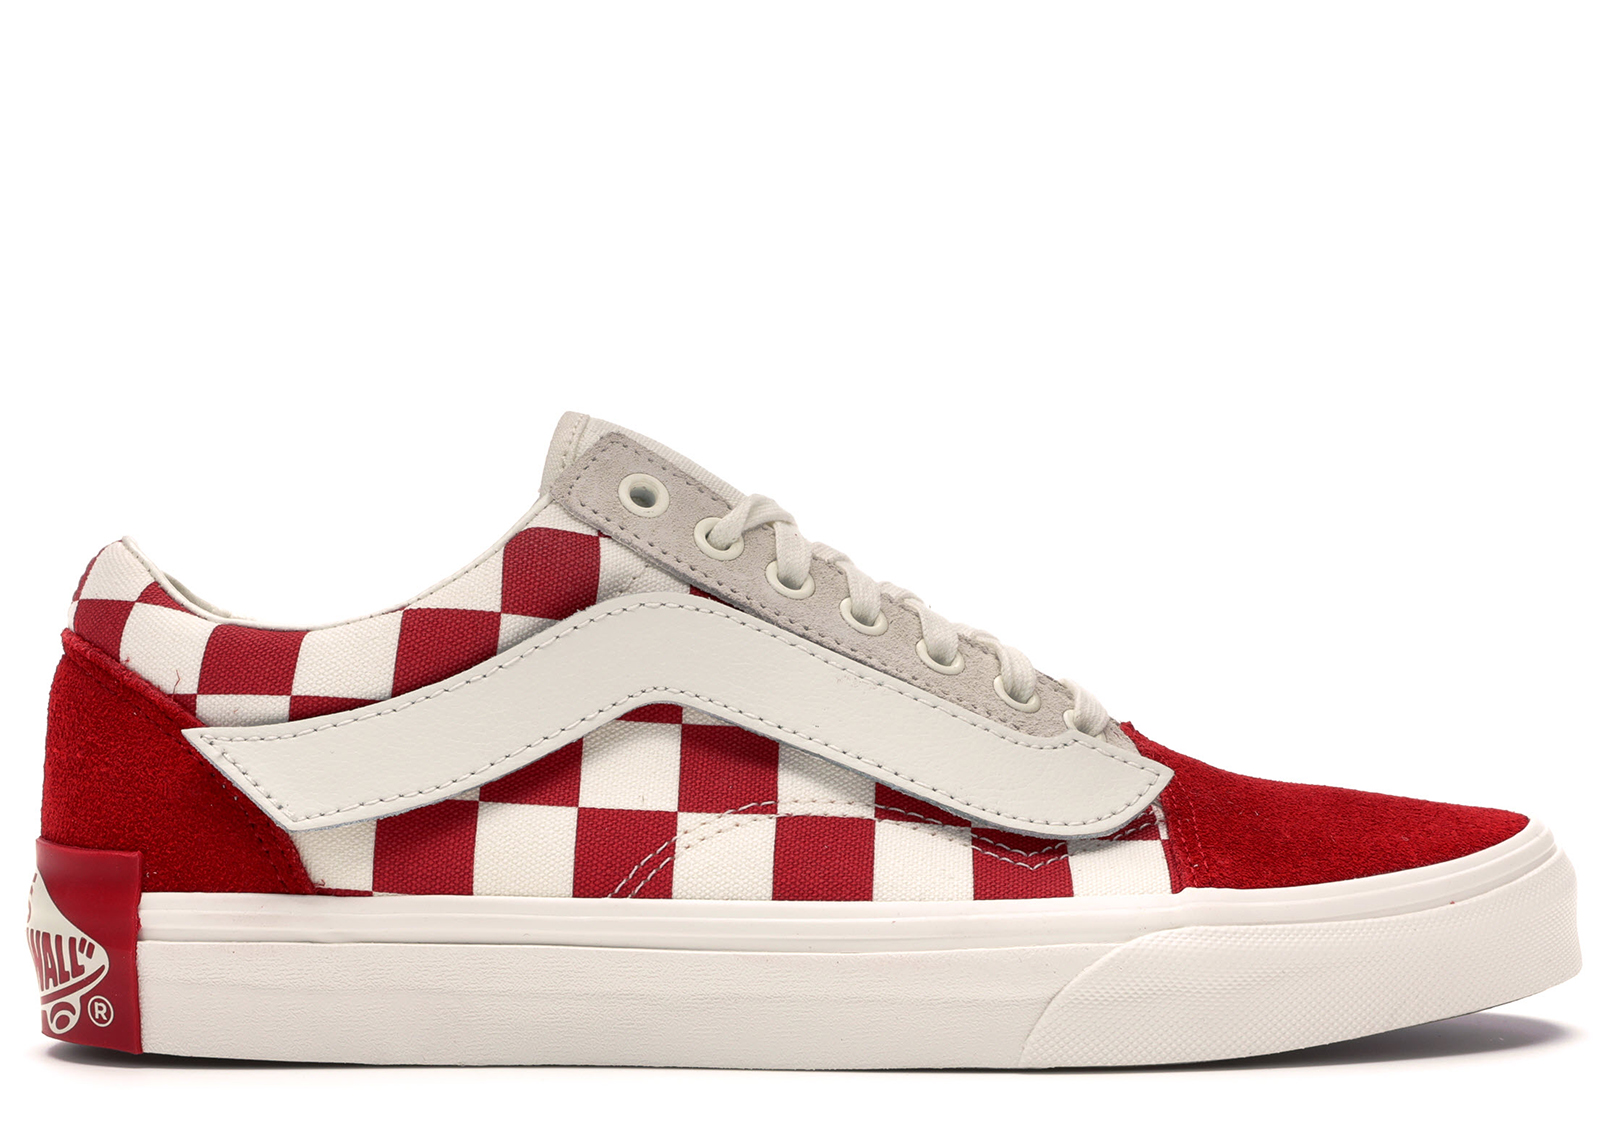 Vans Old Skool Purlicue Year of the Pig メンズ - VN0A38G1SHJ1 - JP